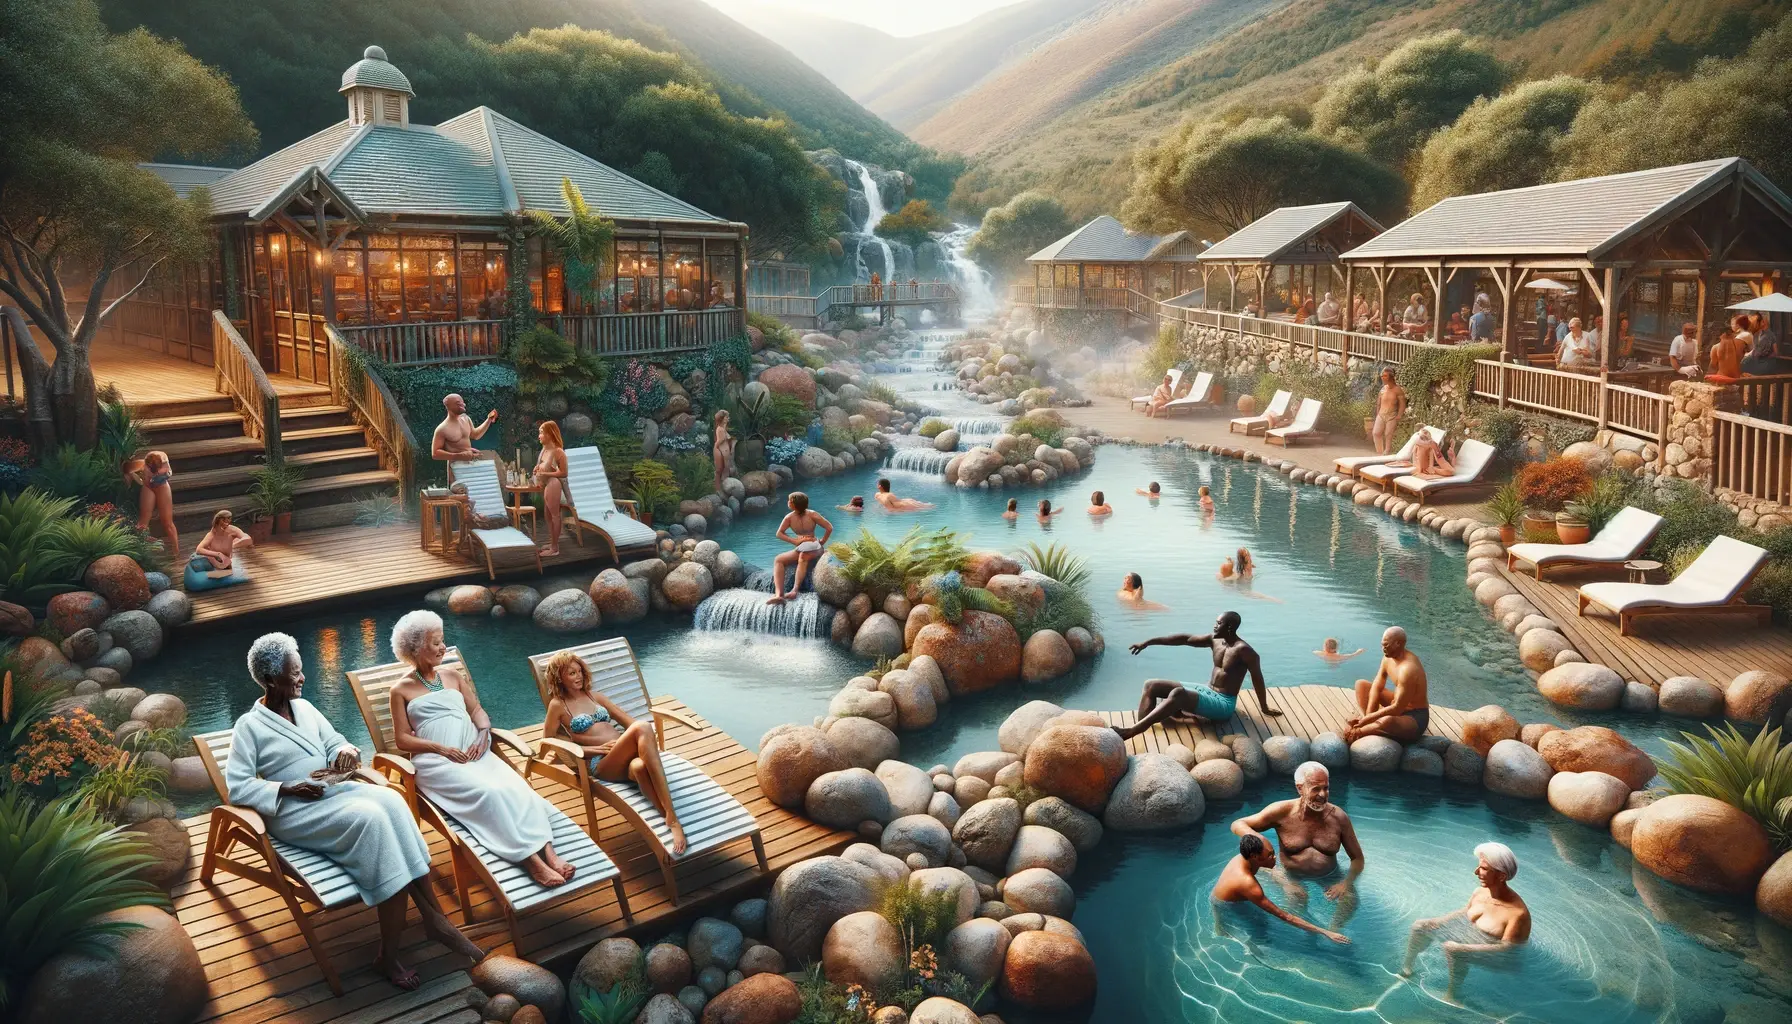 A relaxing and natural image of hot water springs in the Western Cape